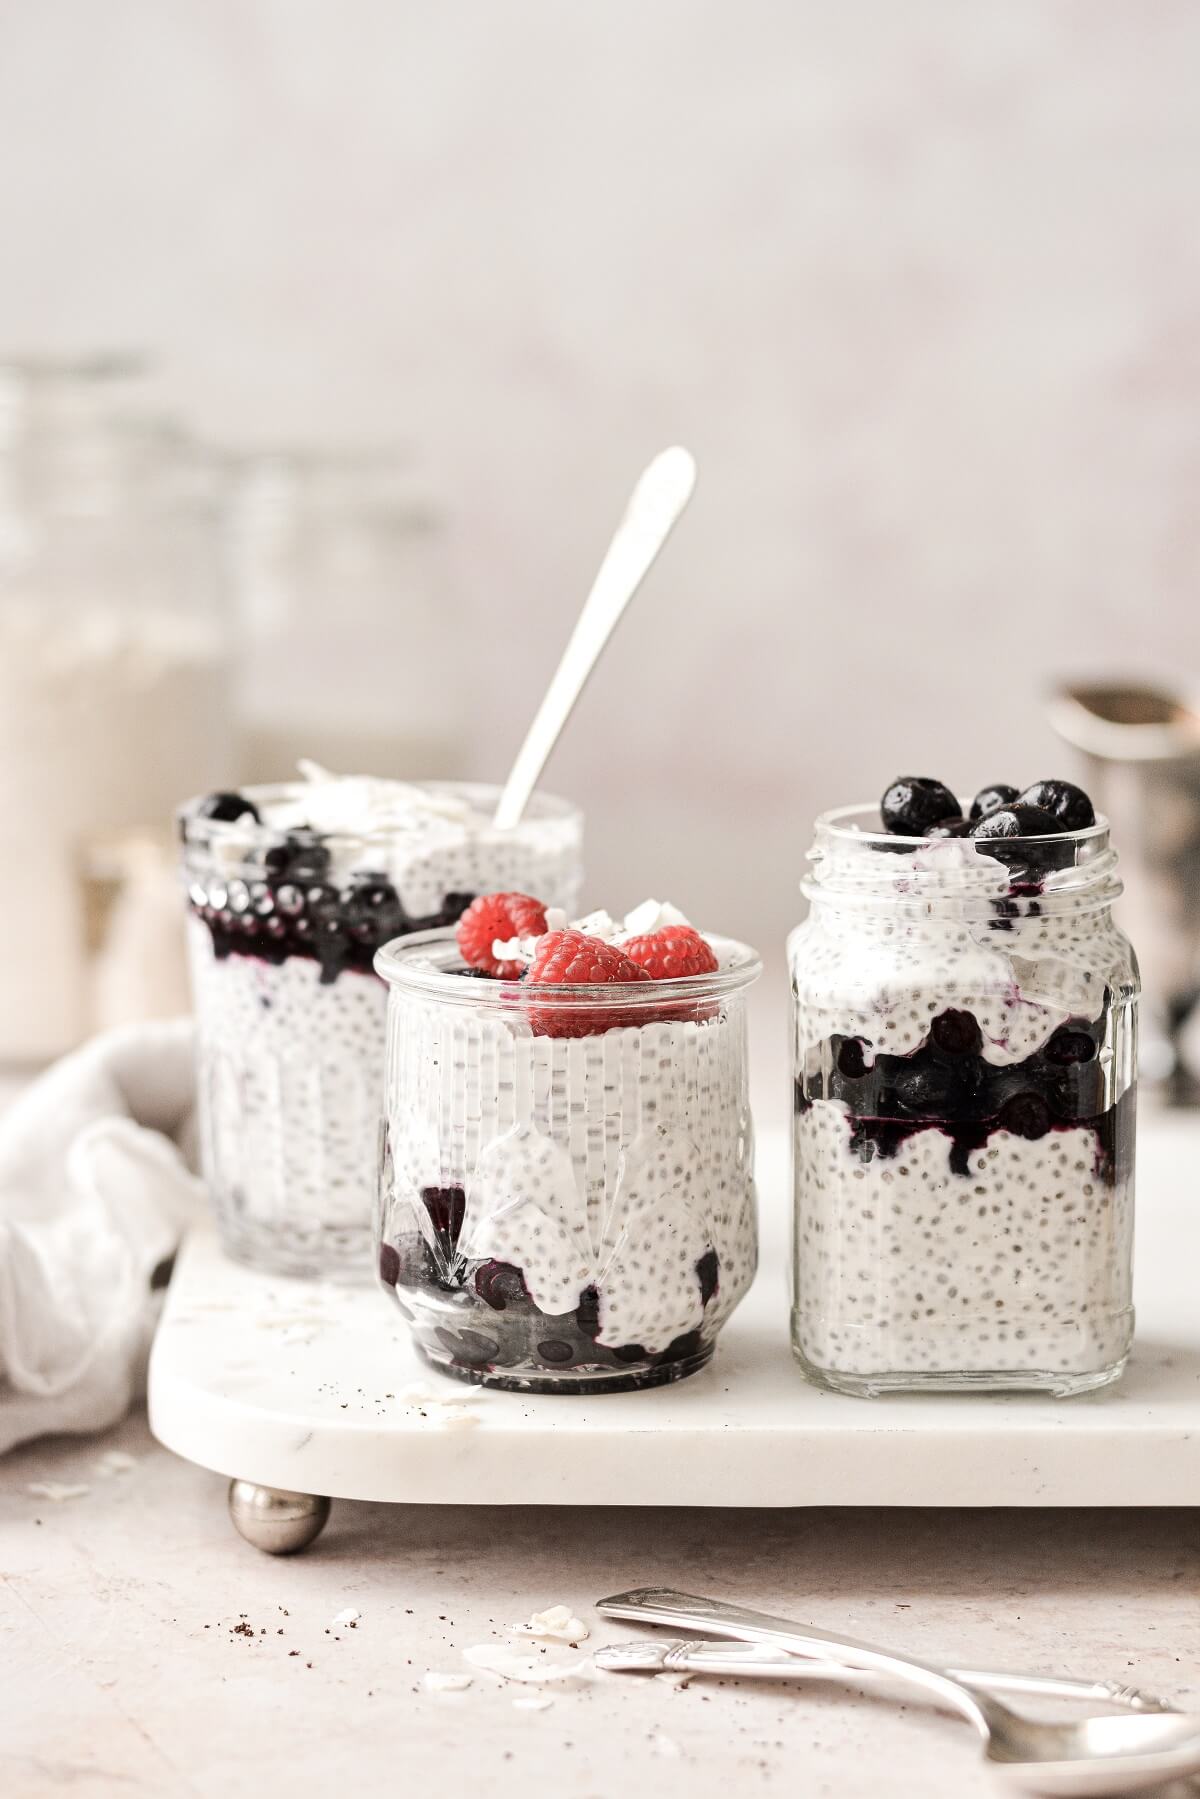 Coconut chia pudding parfaits in glass jars.